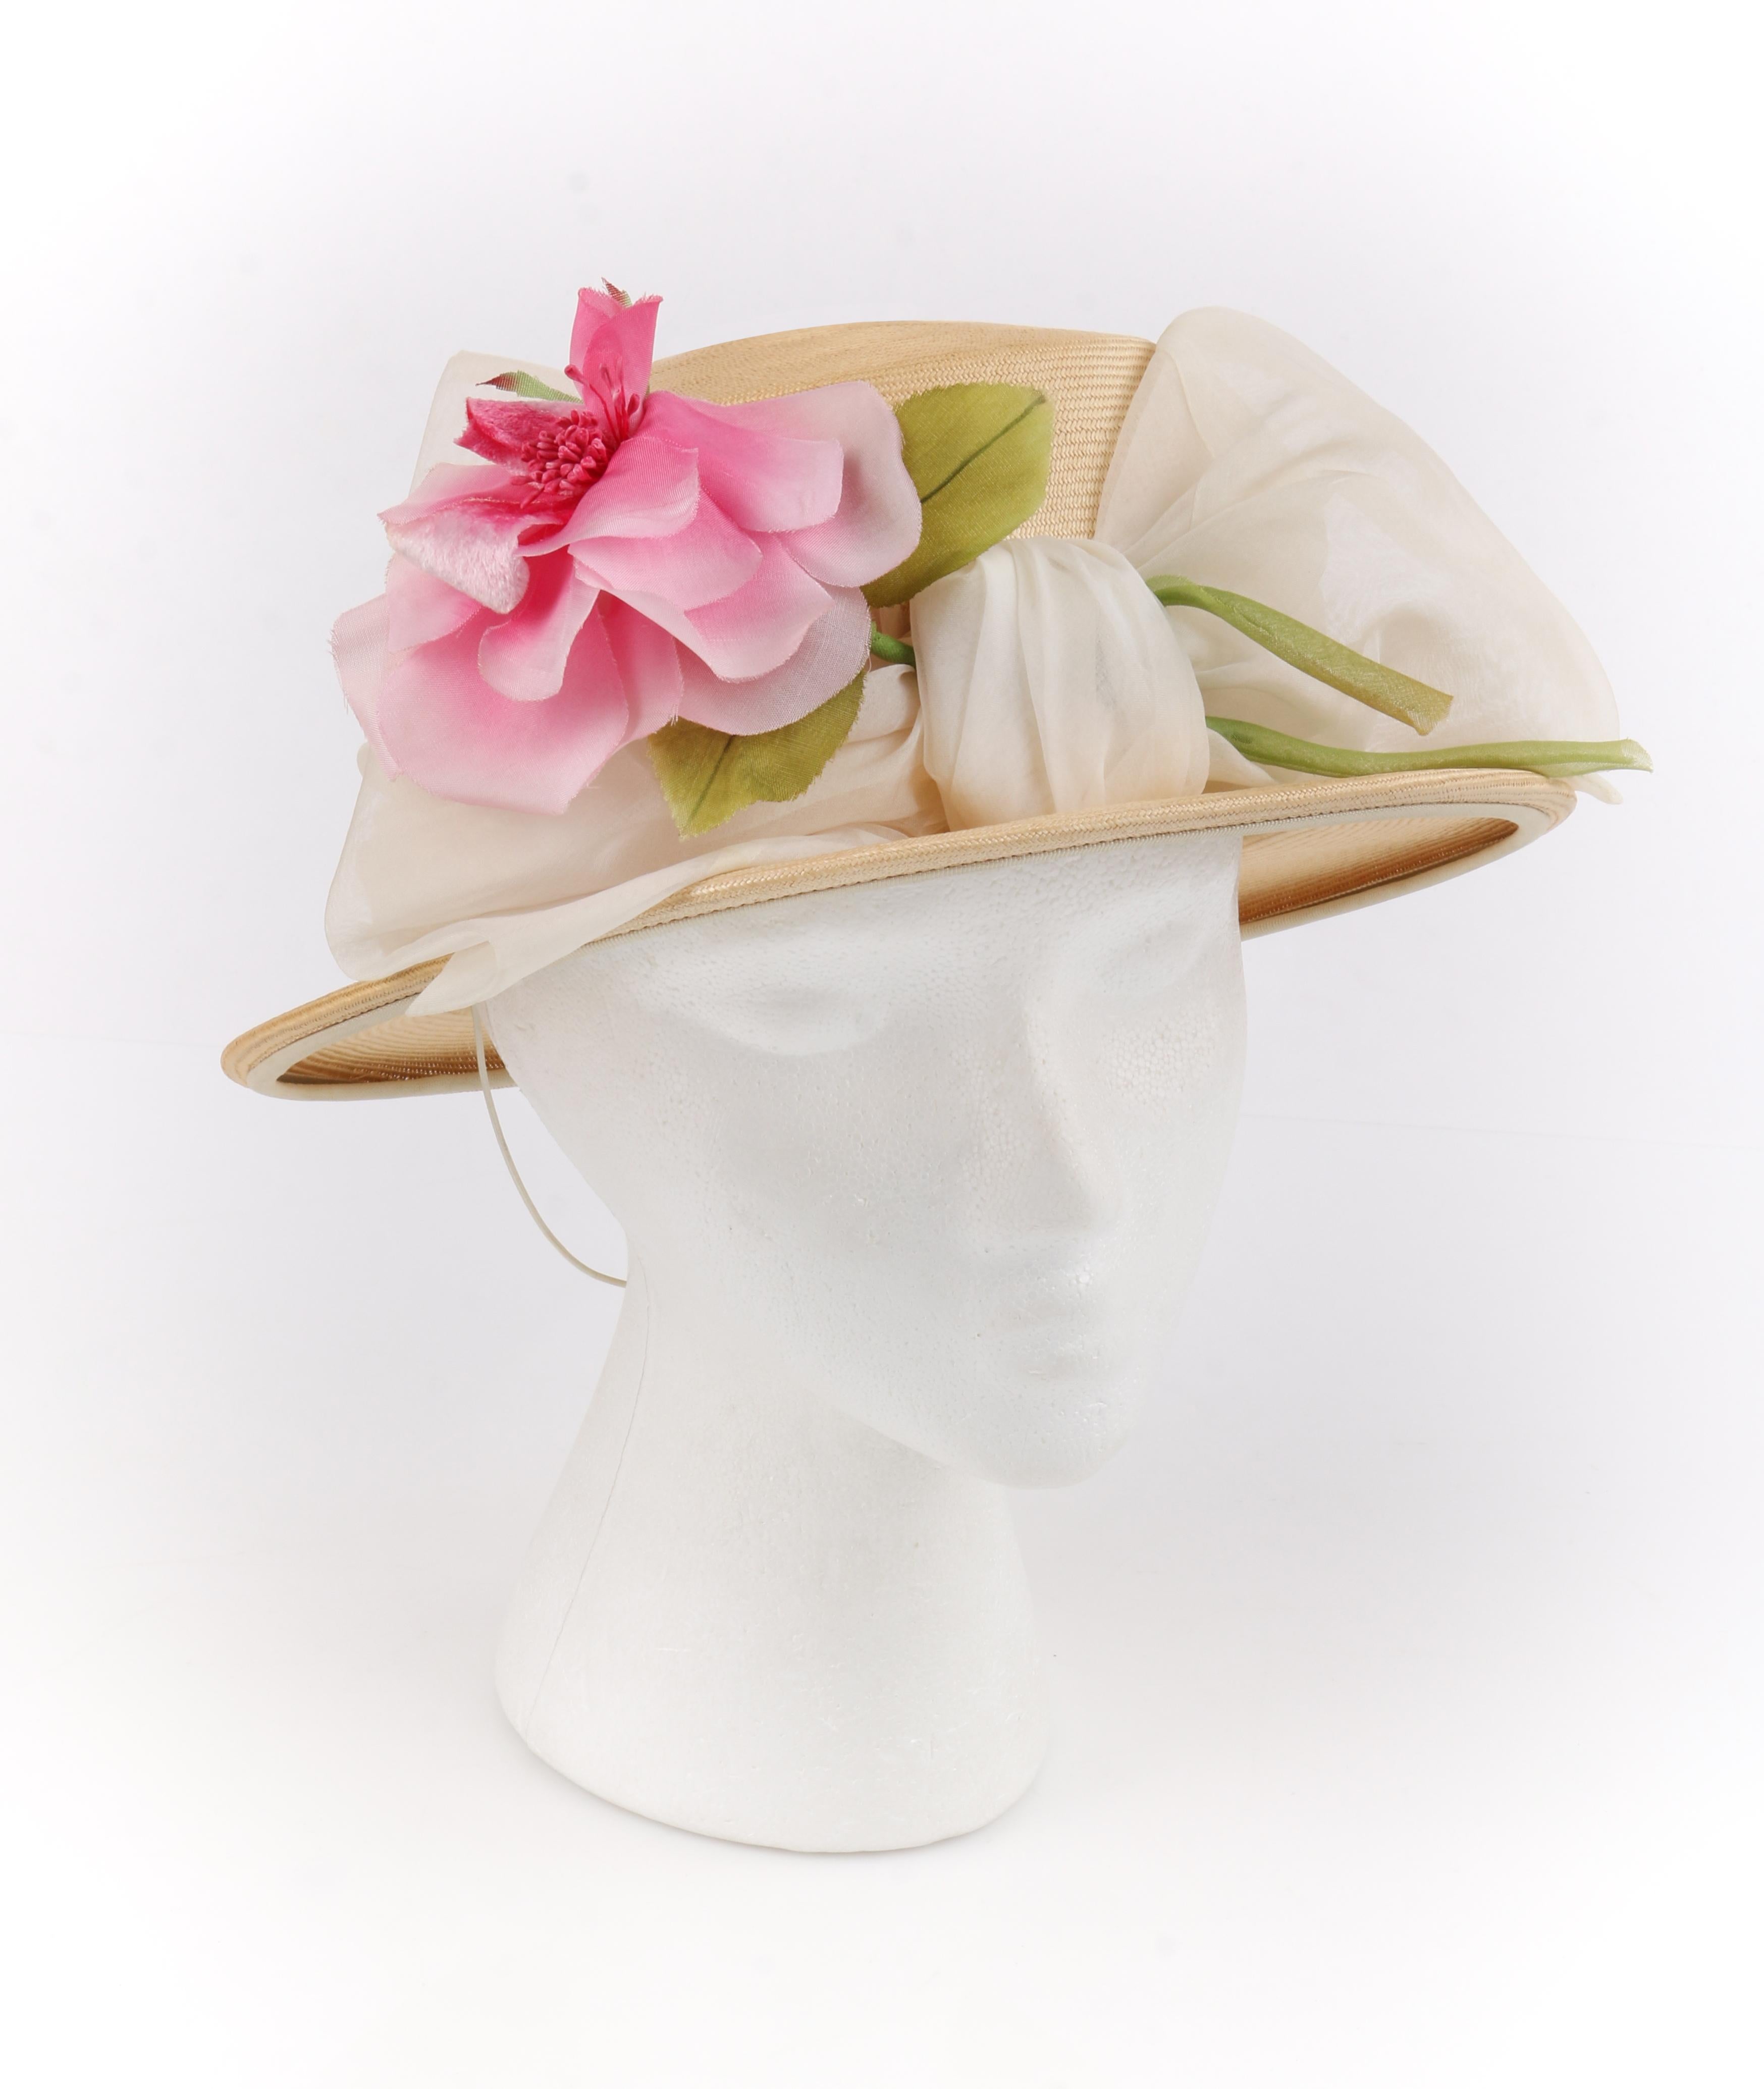 YVES SAINT LAURENT c.1960s Raffia Straw Woven Chiffon Band Bow Flower Boater Hat

Circa: 1960’s
Designer: Yves Saint Laurent
Style: Boater hat
Color(s): Body of the hat is a natural shade; turquoise blue (internal band); detail includes shades of